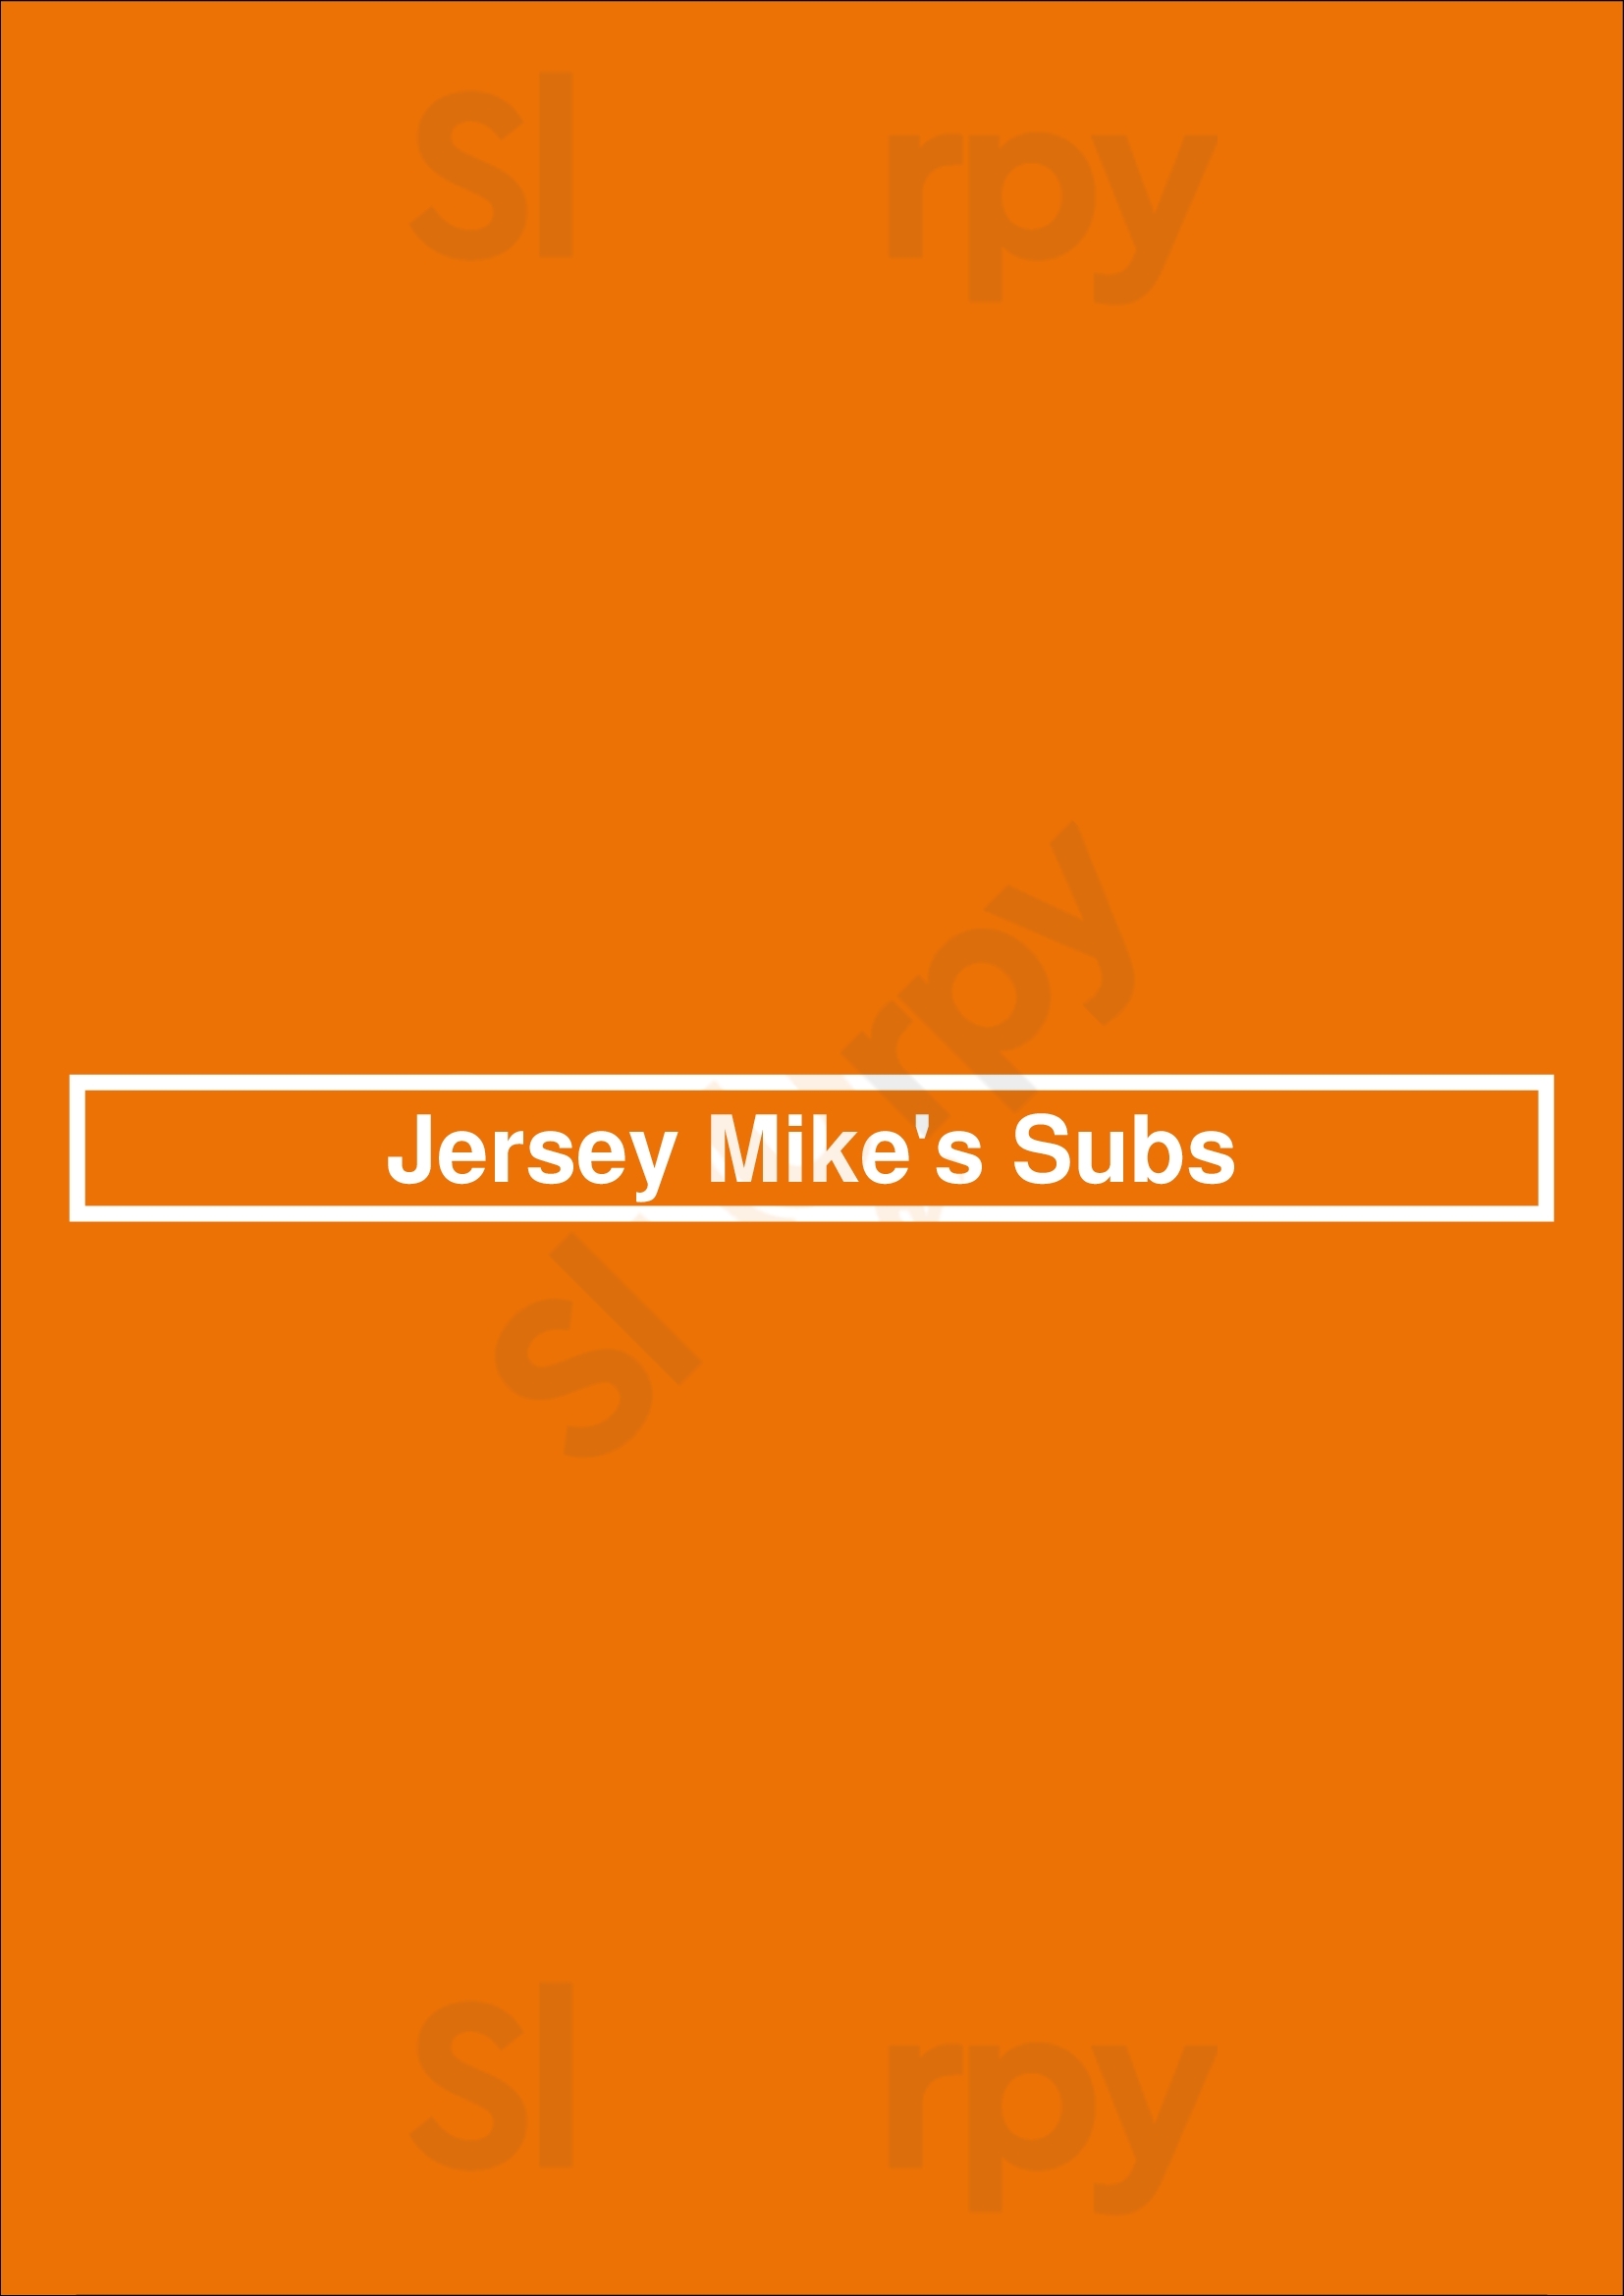 Jersey Mike's Subs Los Angeles Menu - 1